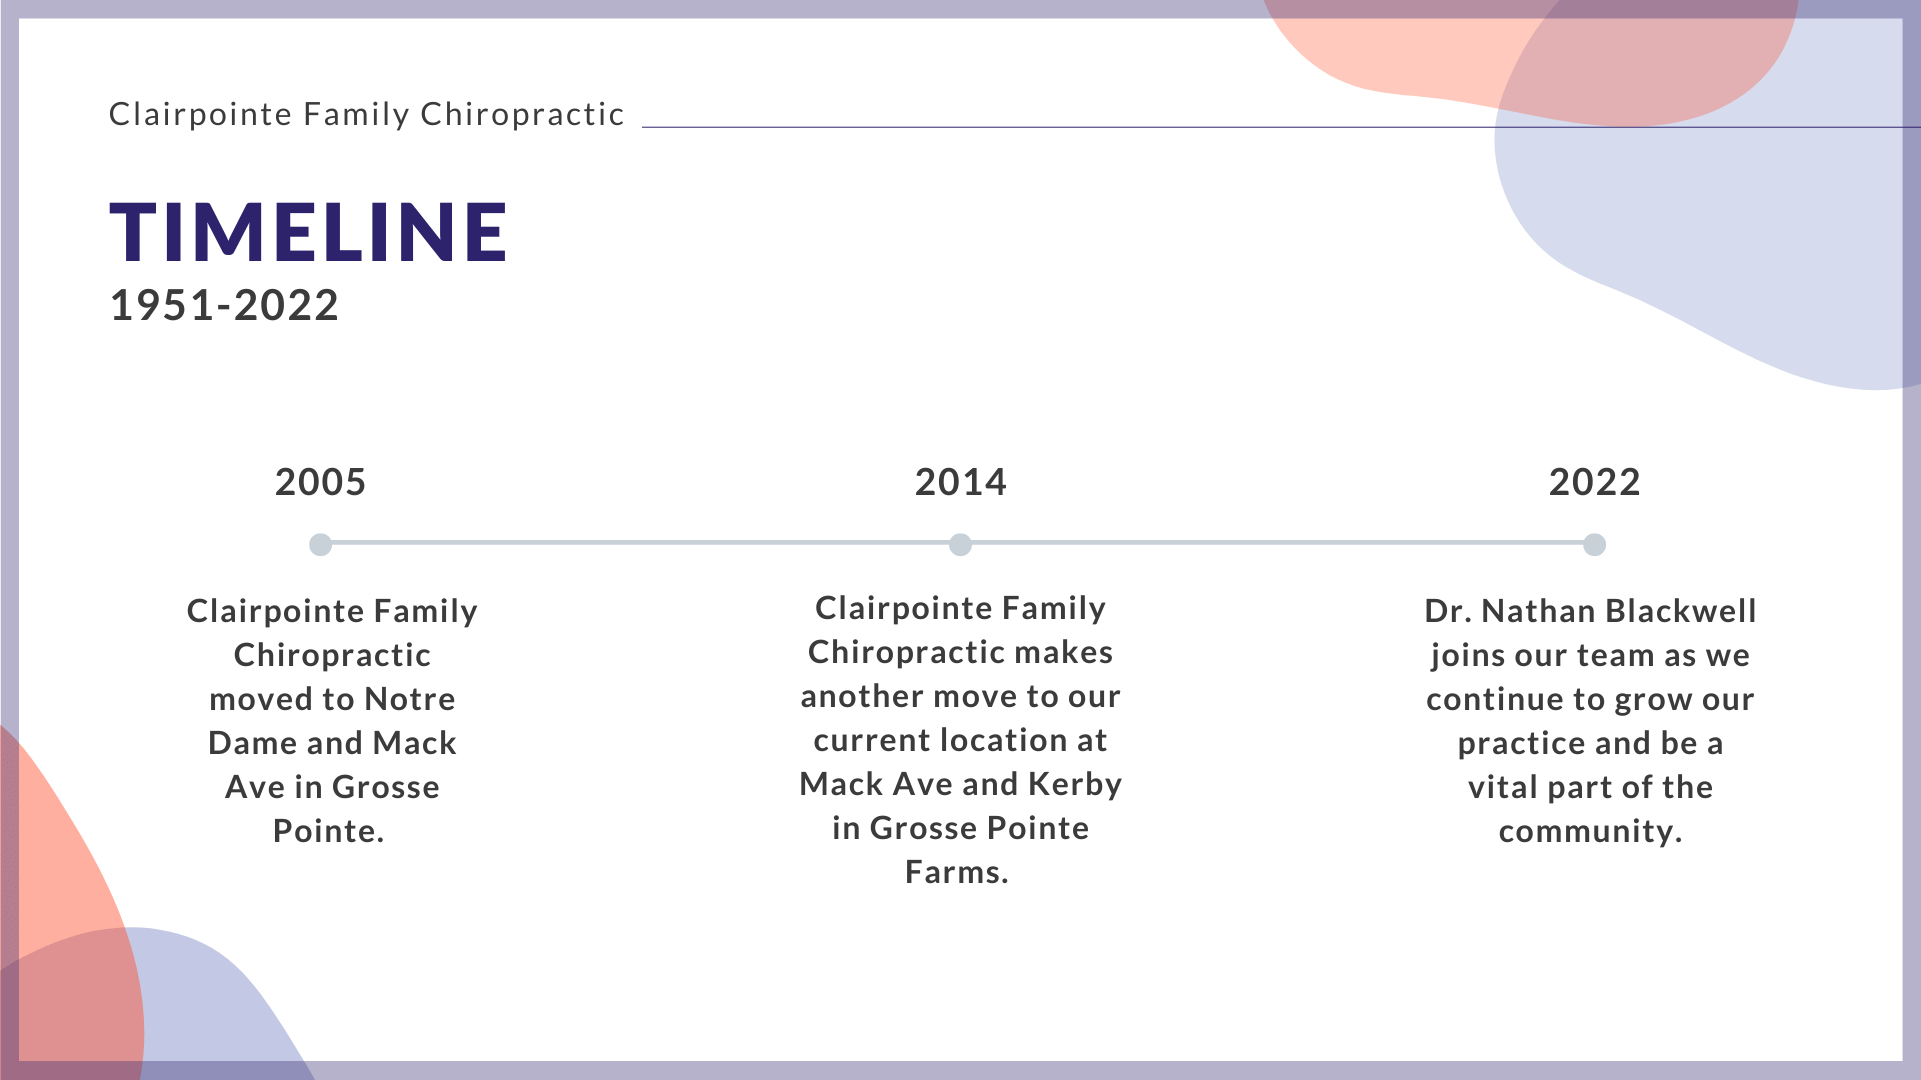 Clairpointe's Timeline 2005 - 2022